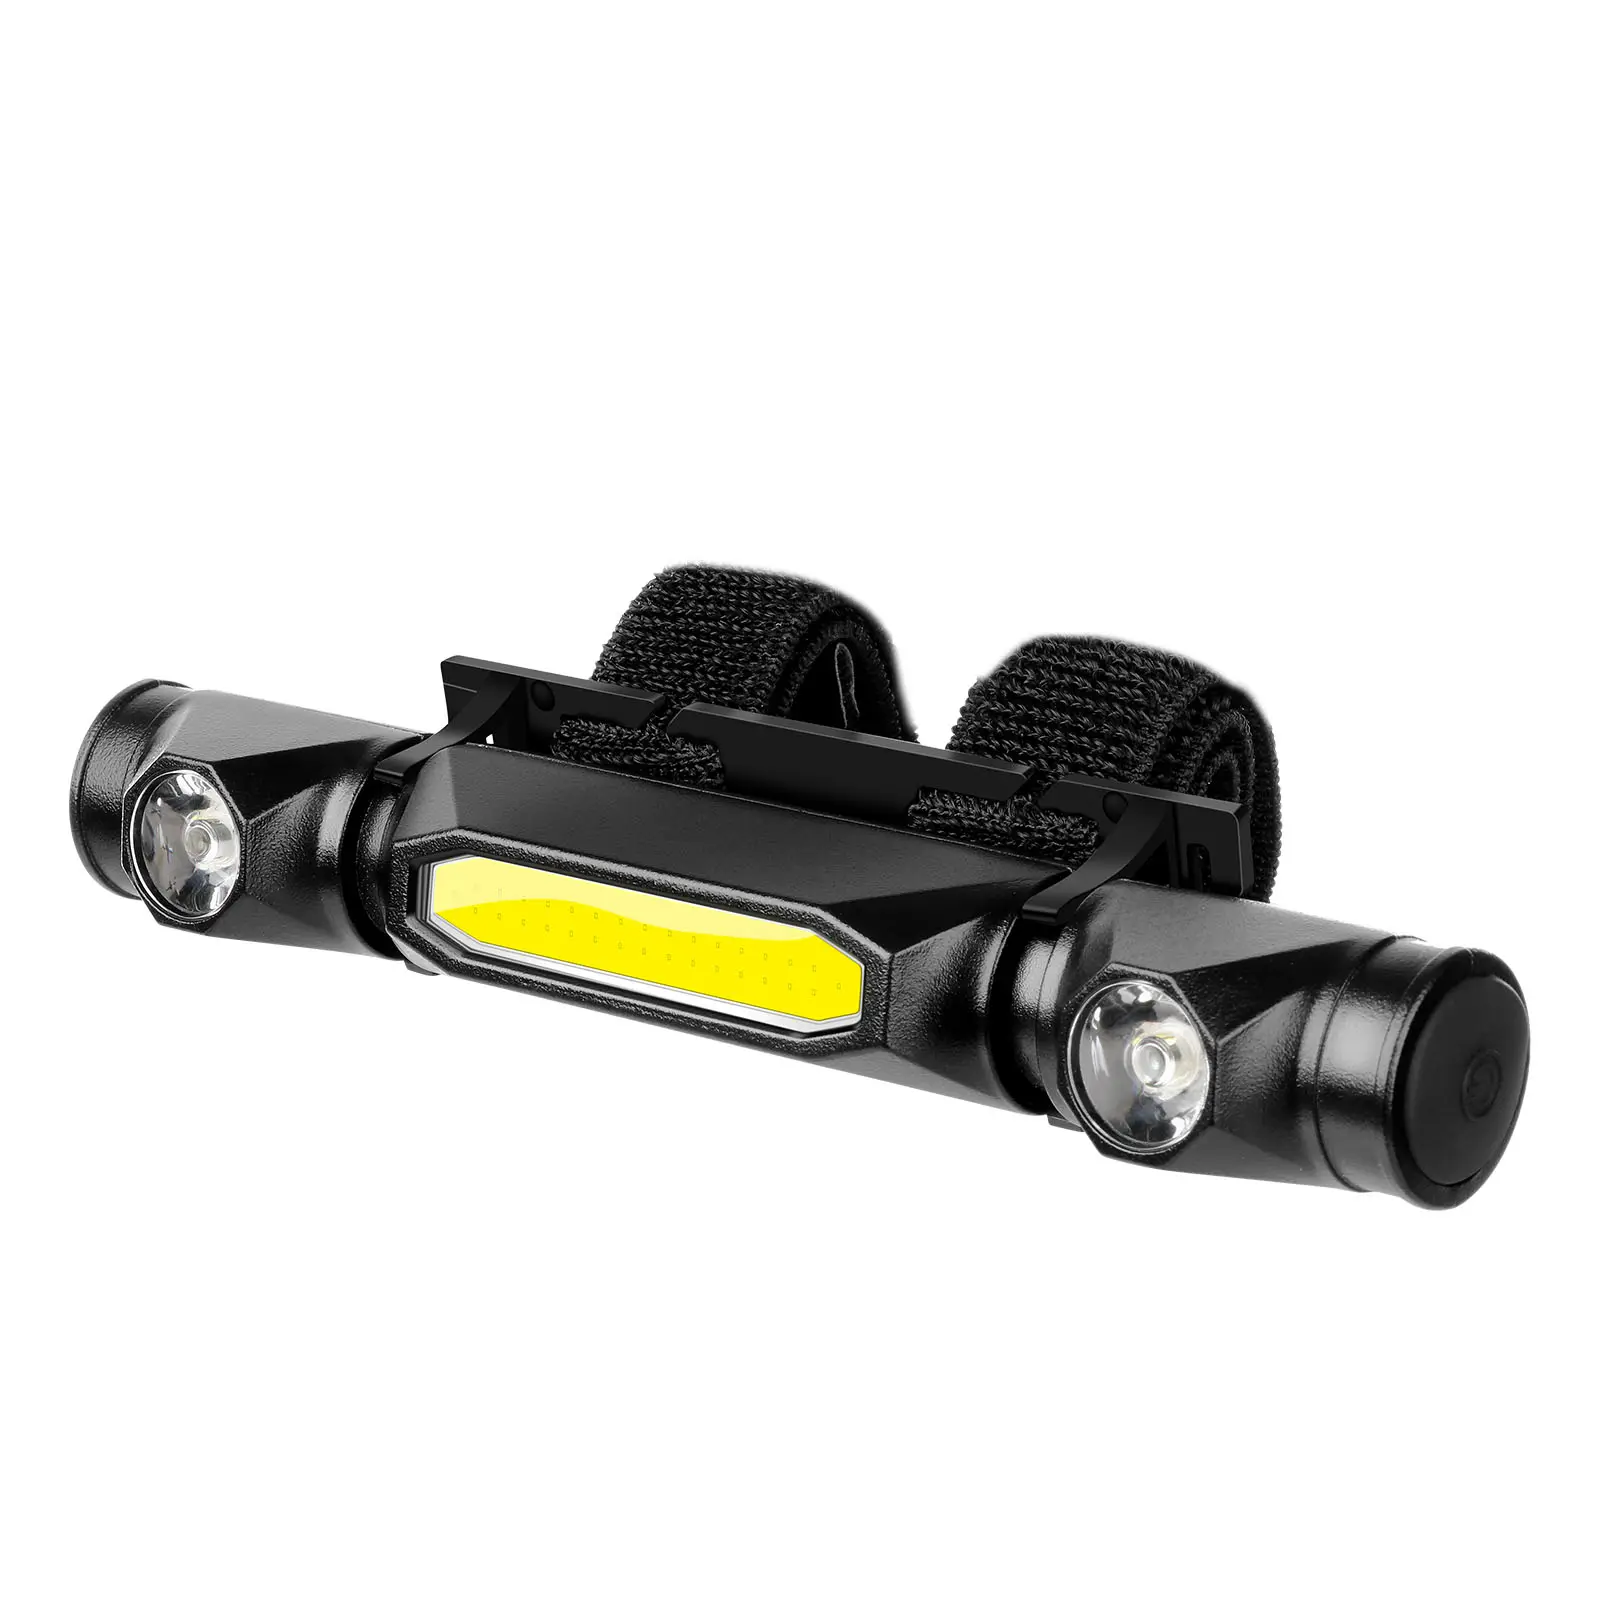 UTV LED light with Roll Bar Portable and rechargeable Flashlights for Outdoor Camping, Driving